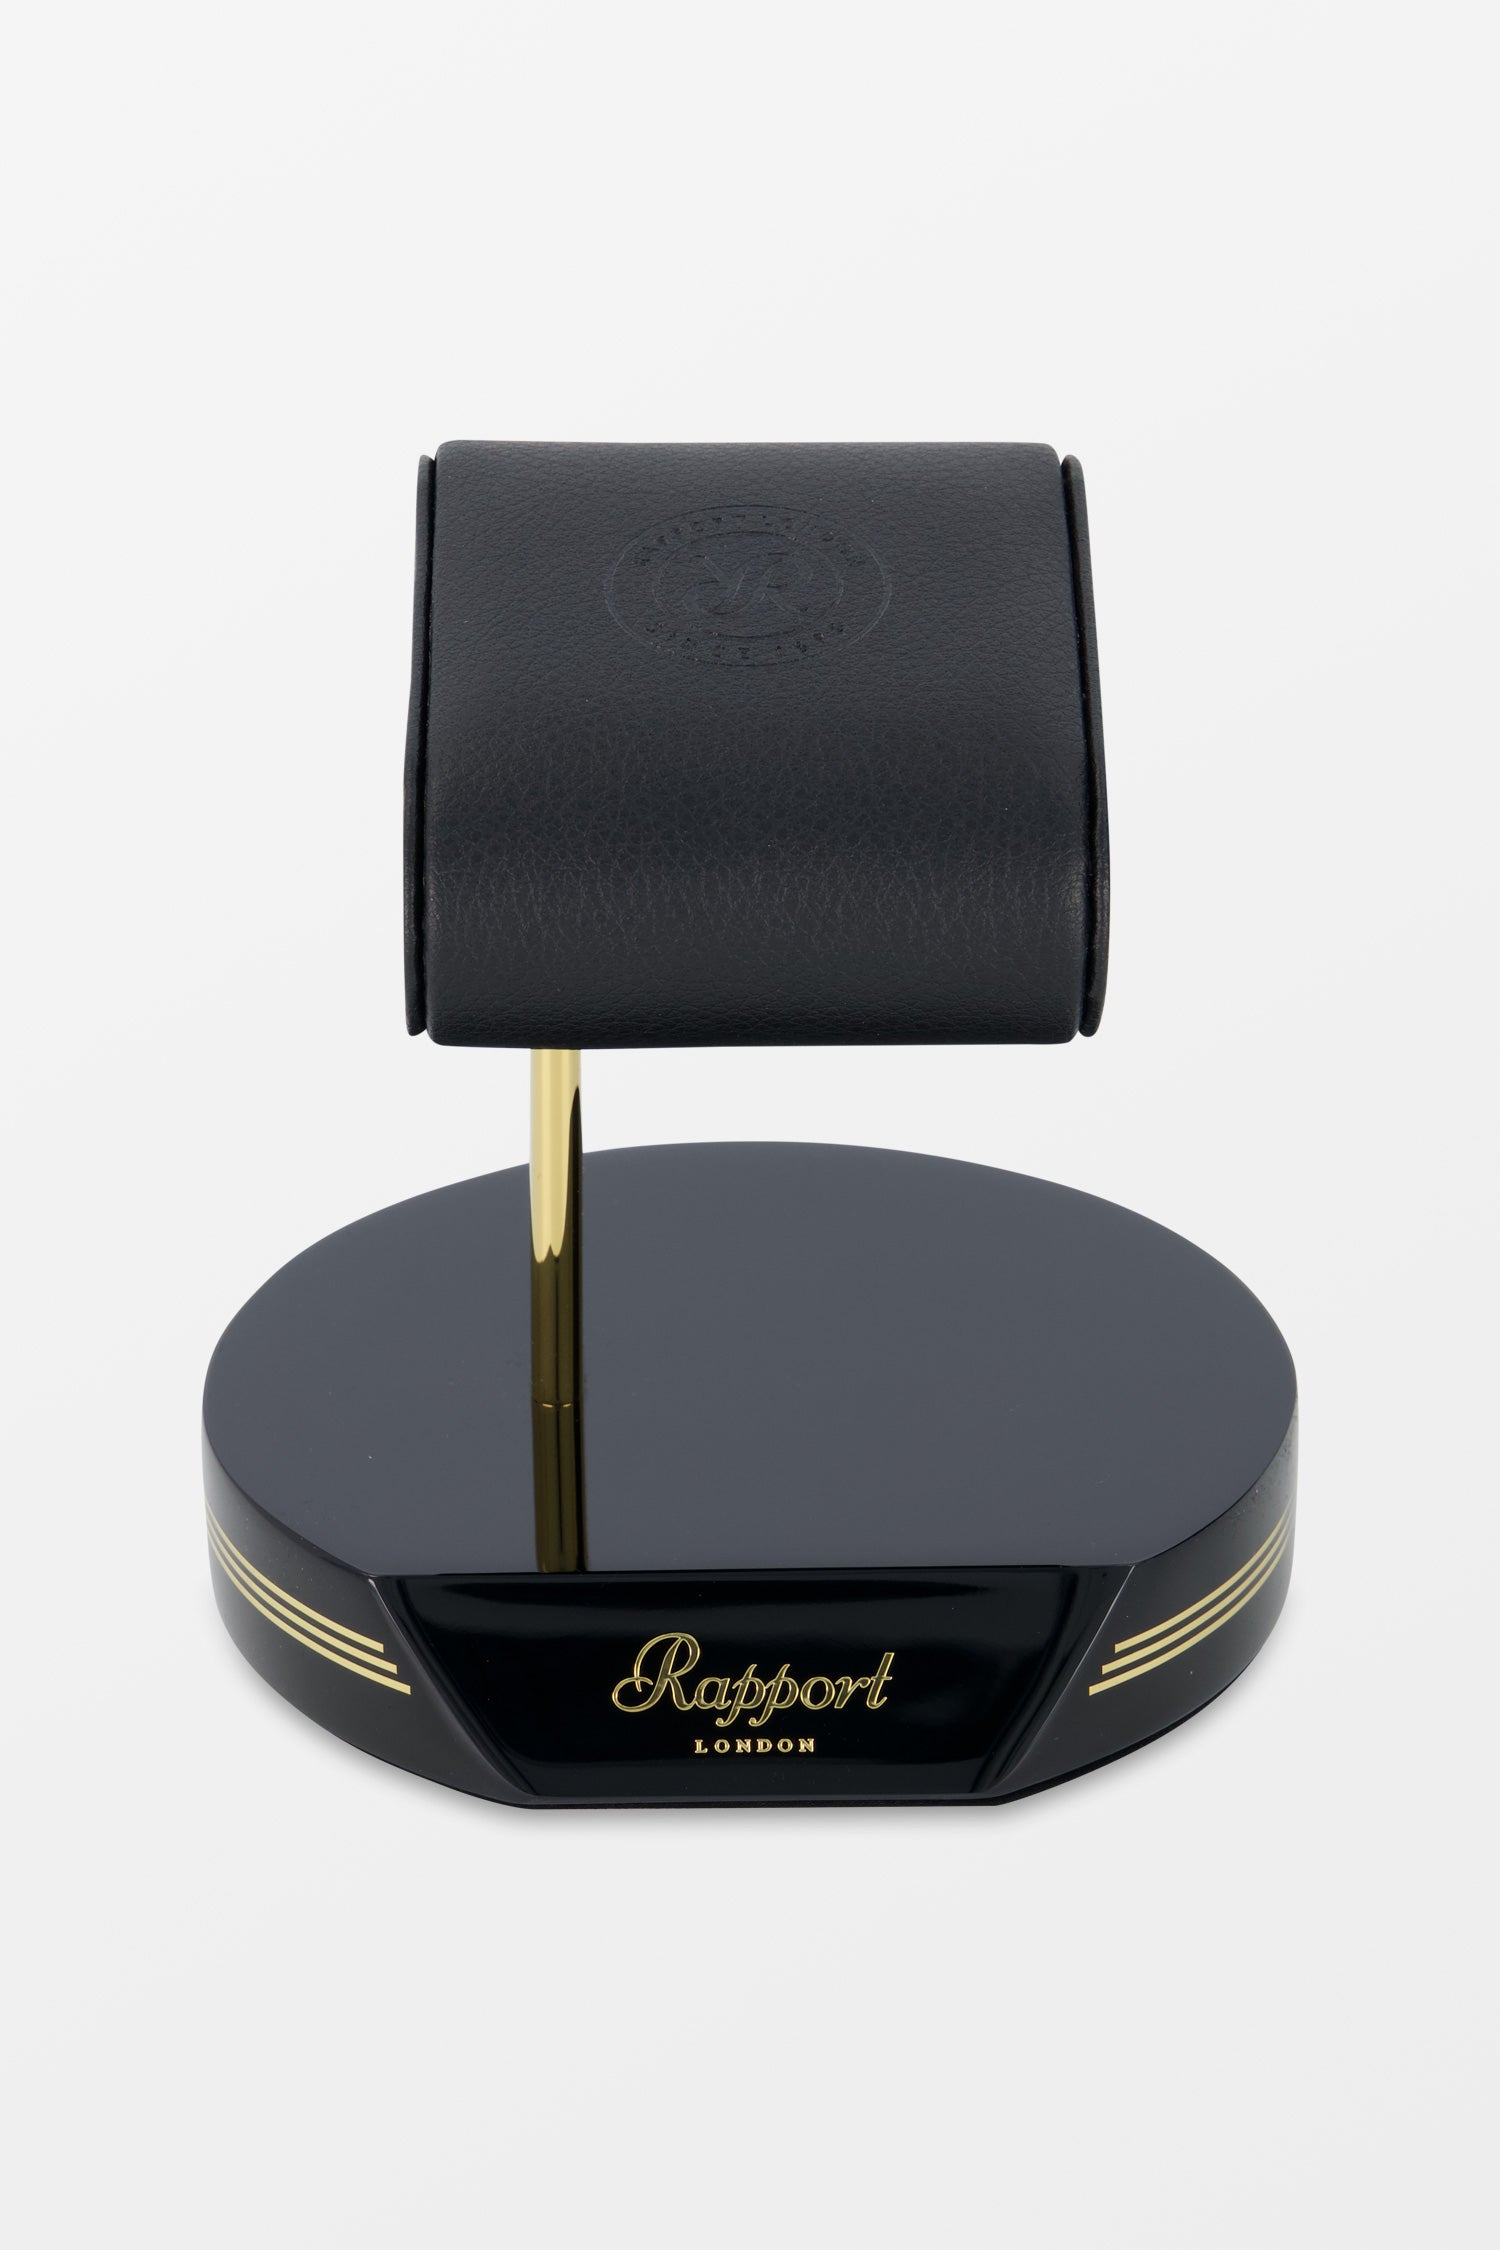 Rapport Black Gold Watch Stand